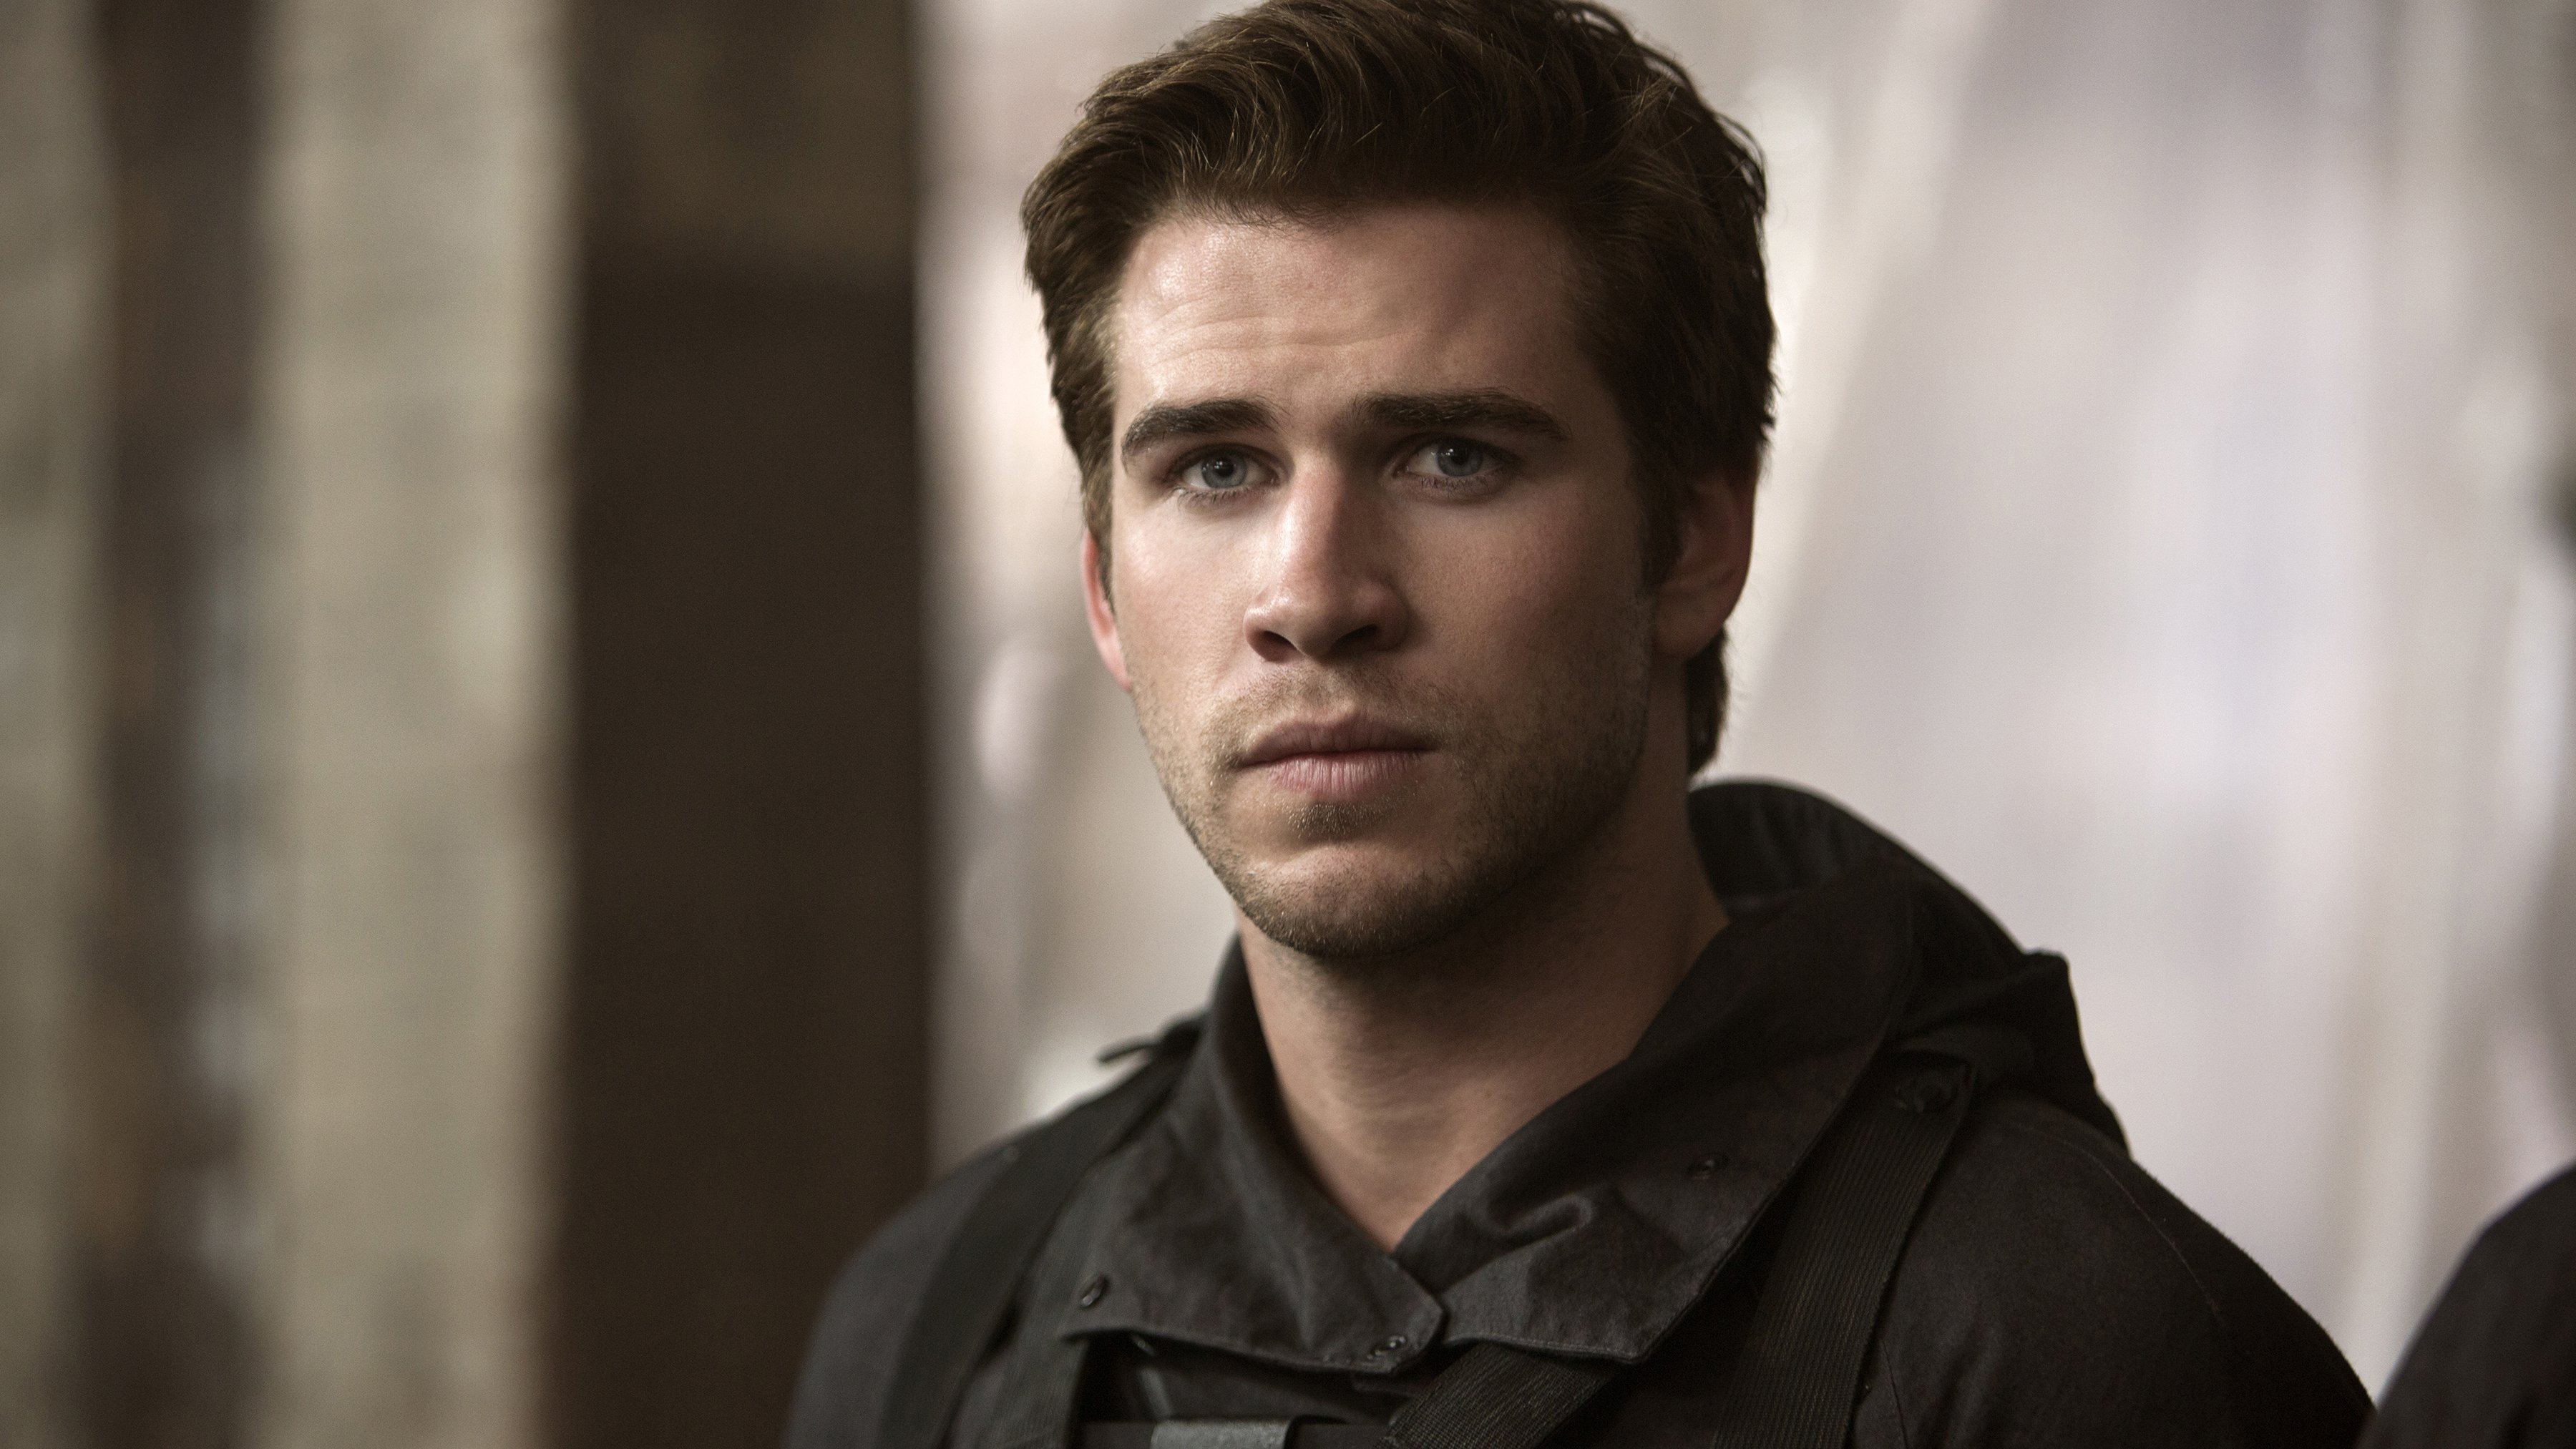 gale hawthorne, movie, the hunger games: mockingjay part 1, liam hemsworth, the hunger games